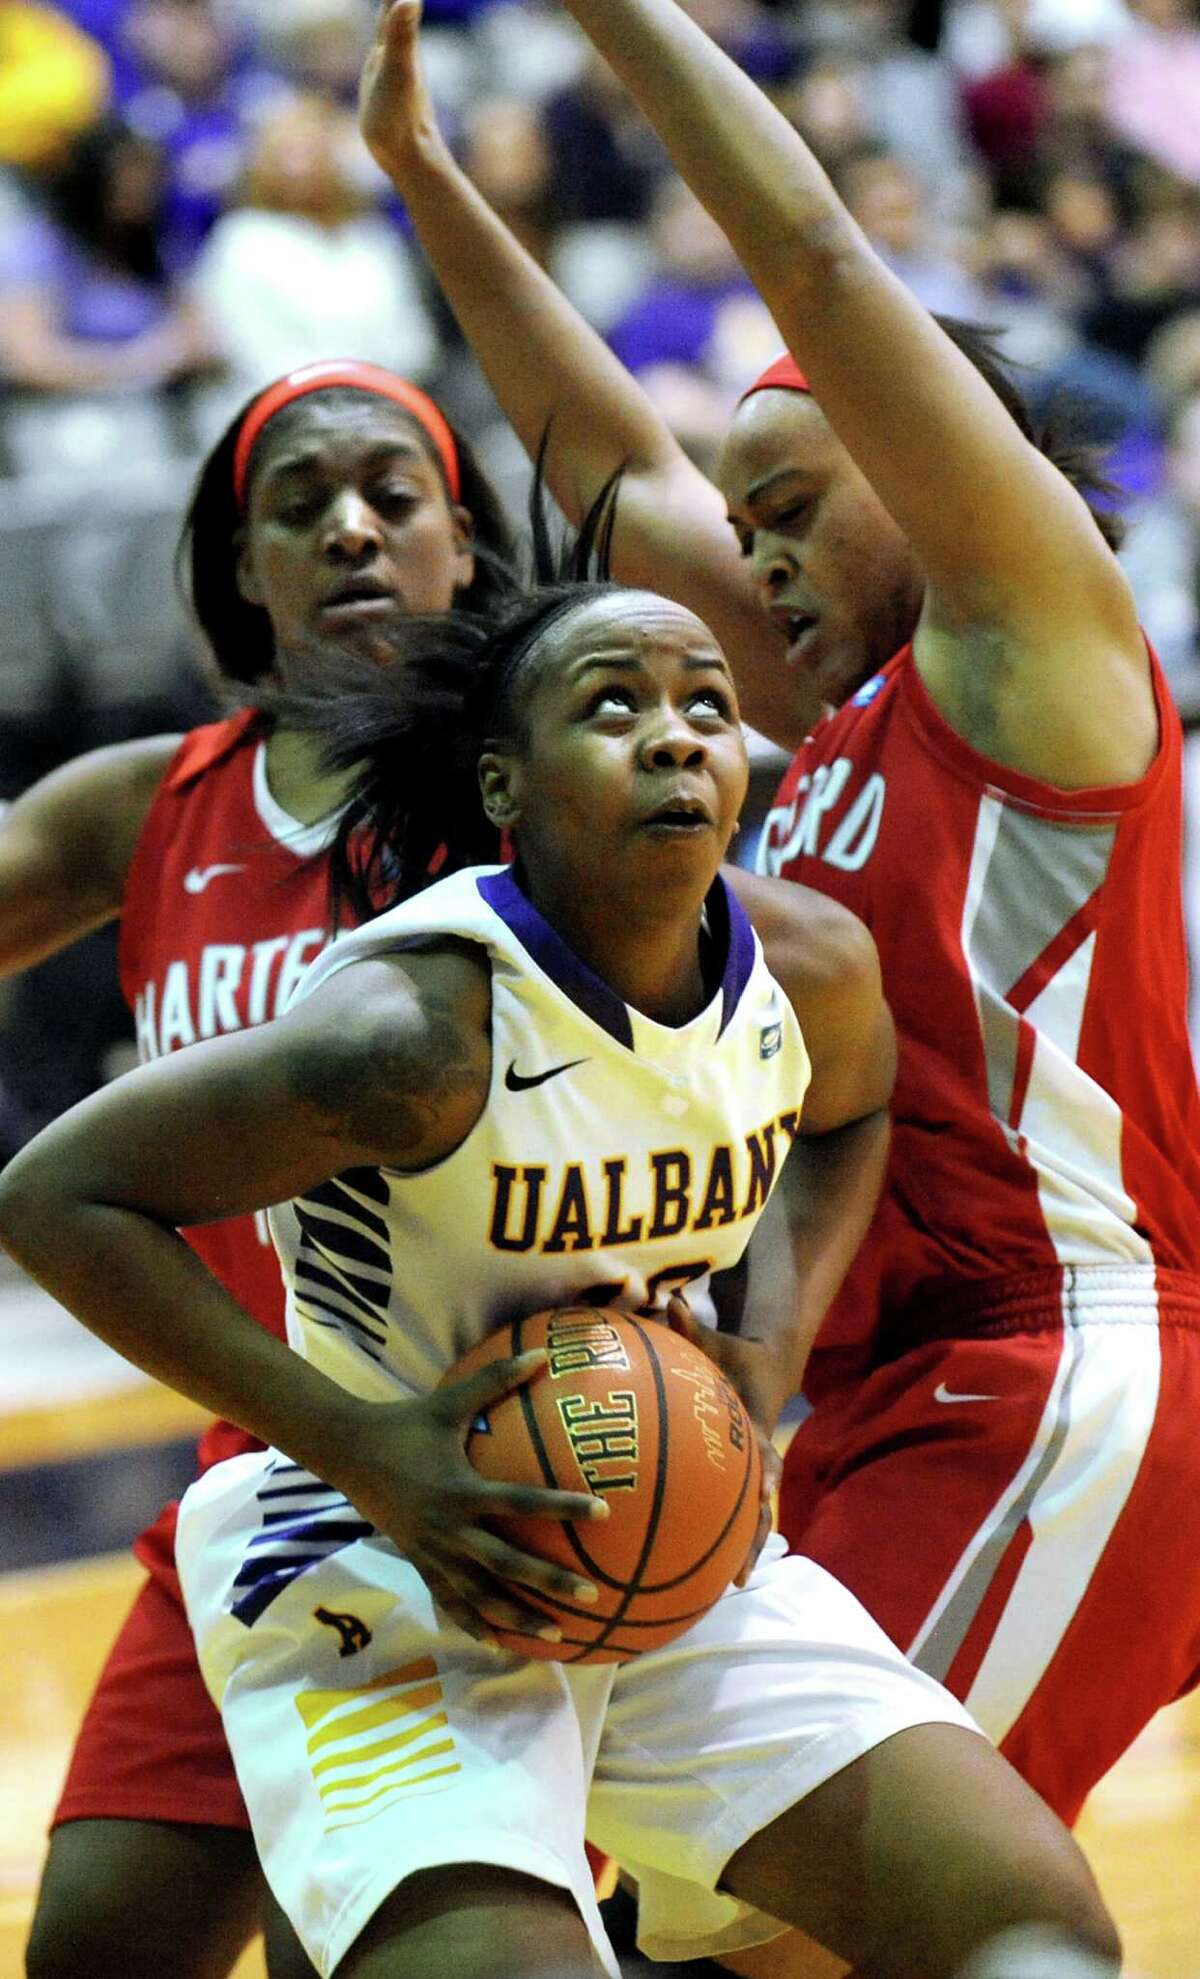 UAlbany's Imani Tate, center, looks to the hoop as Hartford's La'Trice Hall, left, and Cherelle Moore defend during their America East Championship game on Friday, March 13, 2015, at UAlbany in Albany, N.Y. (Cindy Schultz / Times Union)